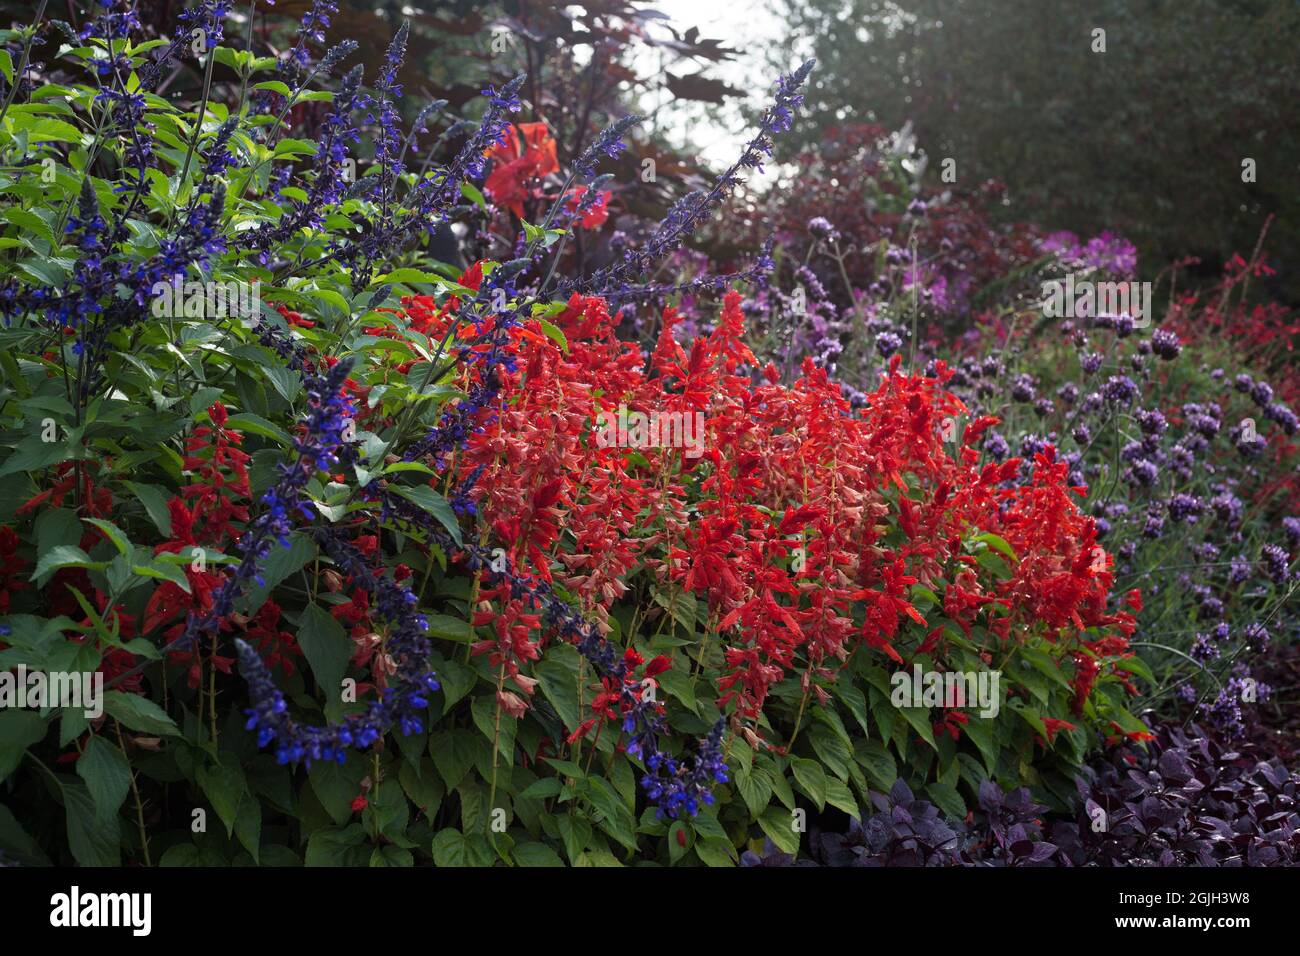 A flower bed designed with royal colors: red, blue, purple. Stock Photo